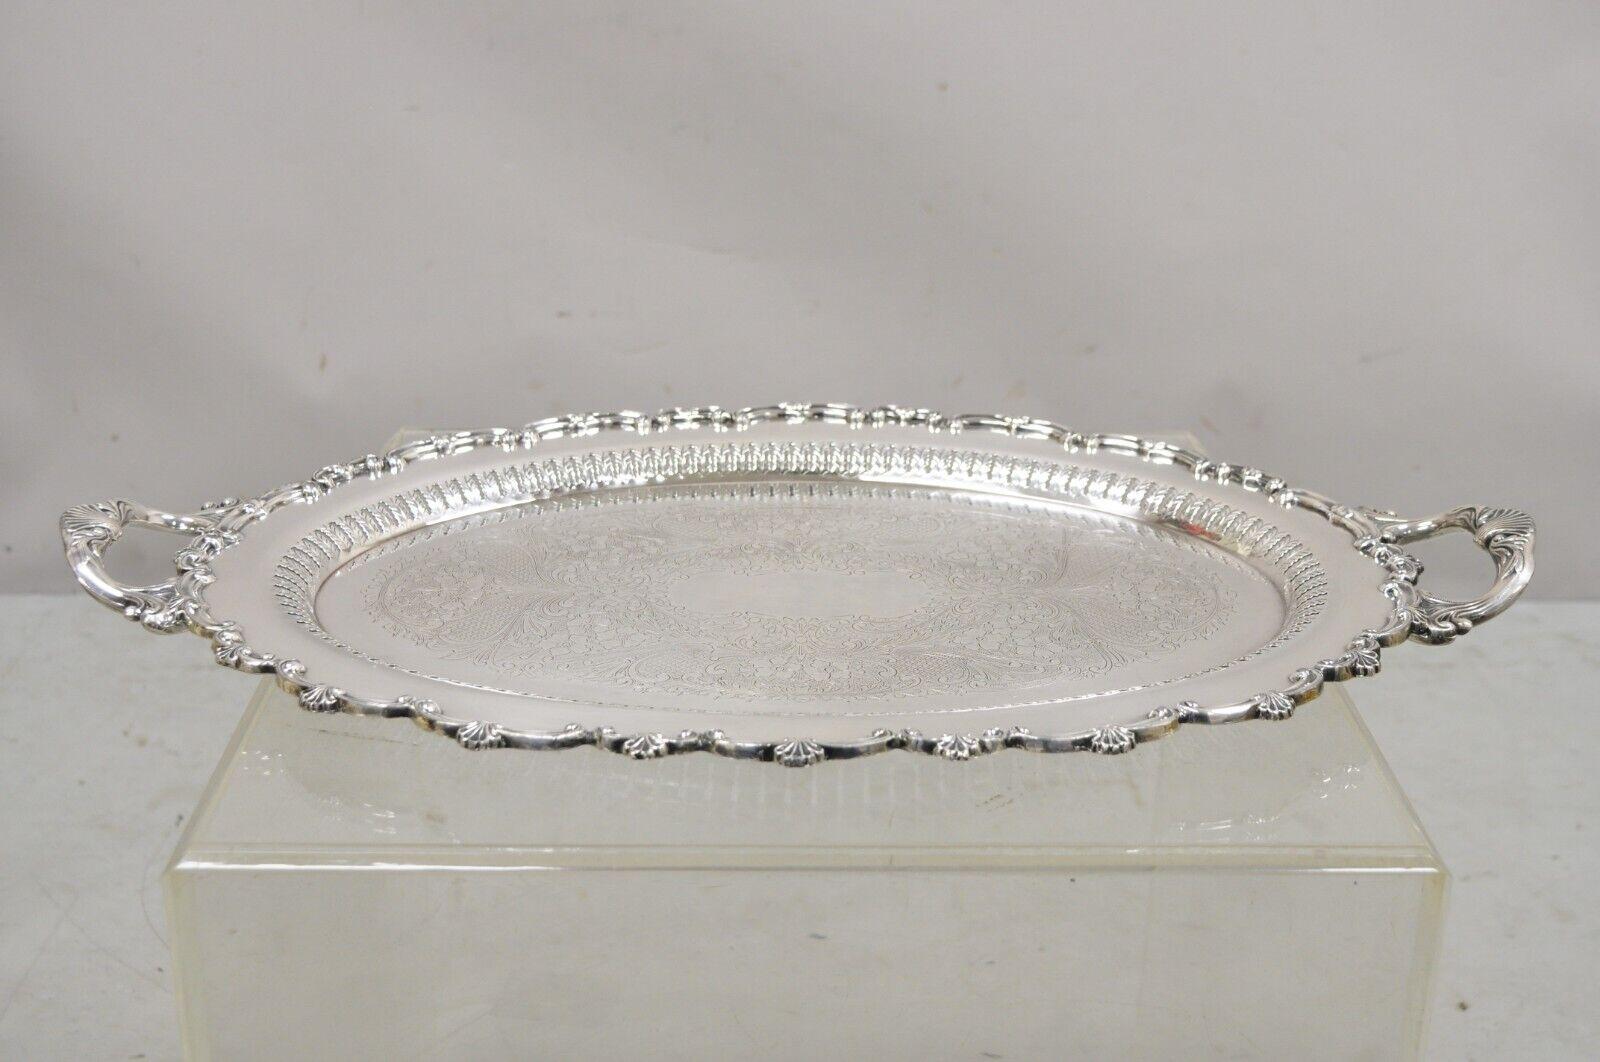 Antique Edwardian silver plated oval serving platter tray with Pierced Decoration. Item features through pierced decorated inner rim, marked 